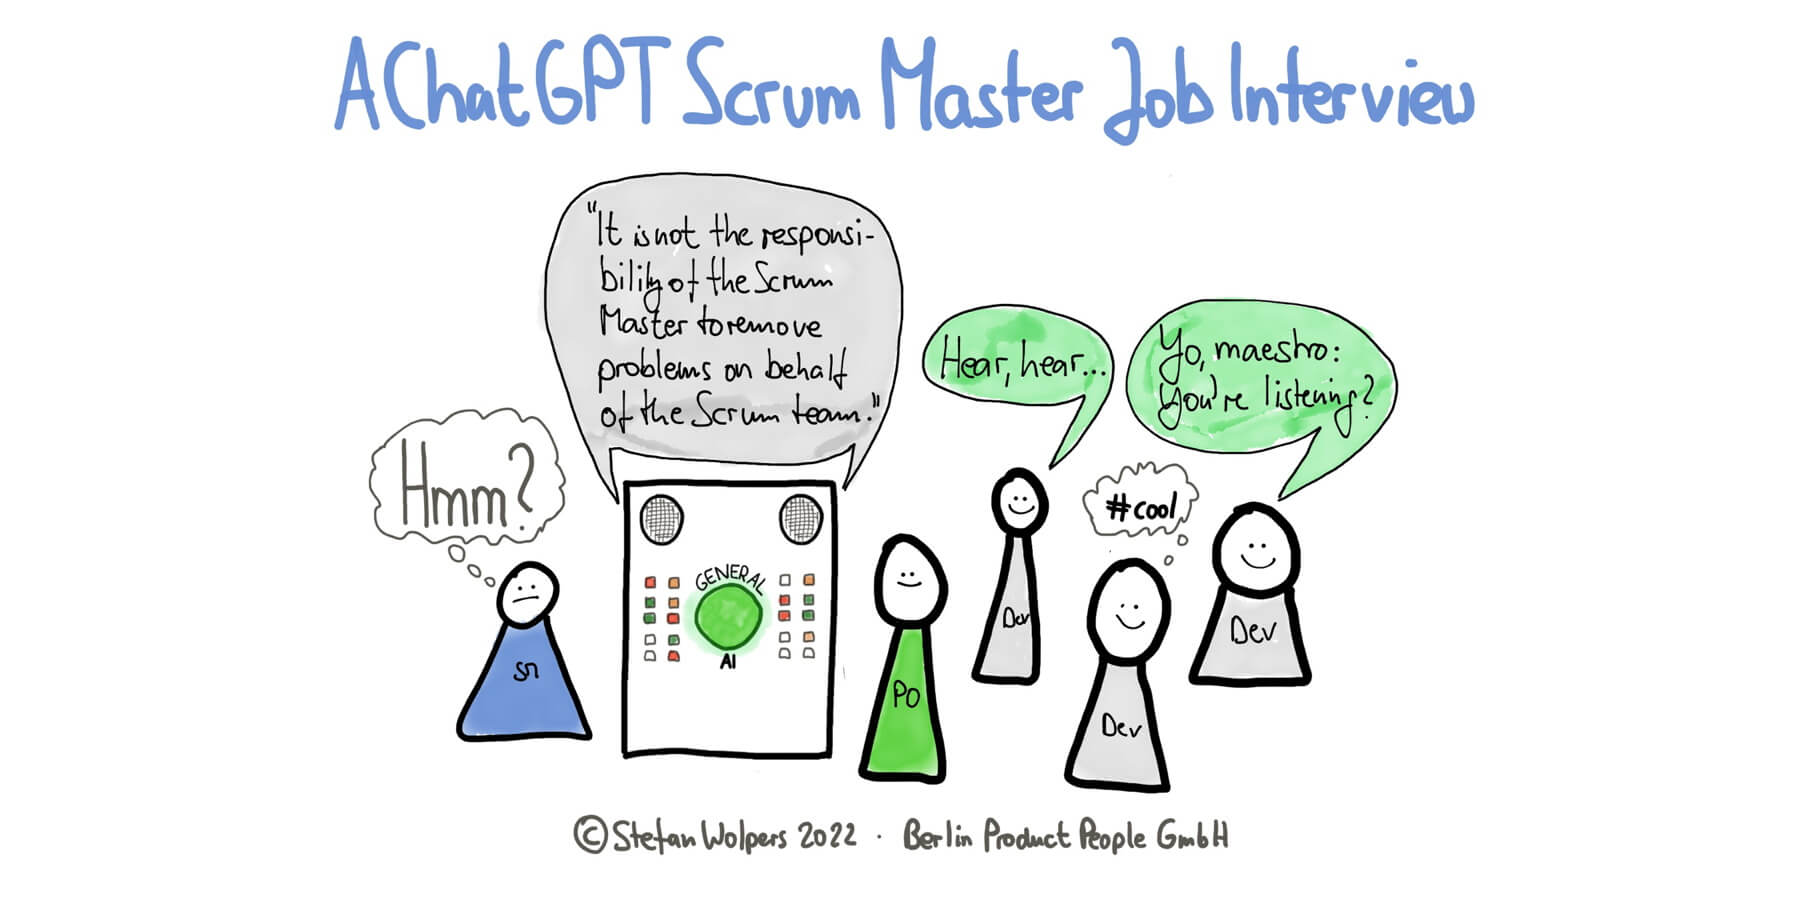 ChatGPT Job Interview for a Scrum Master Position — Berlin-Product-People.com